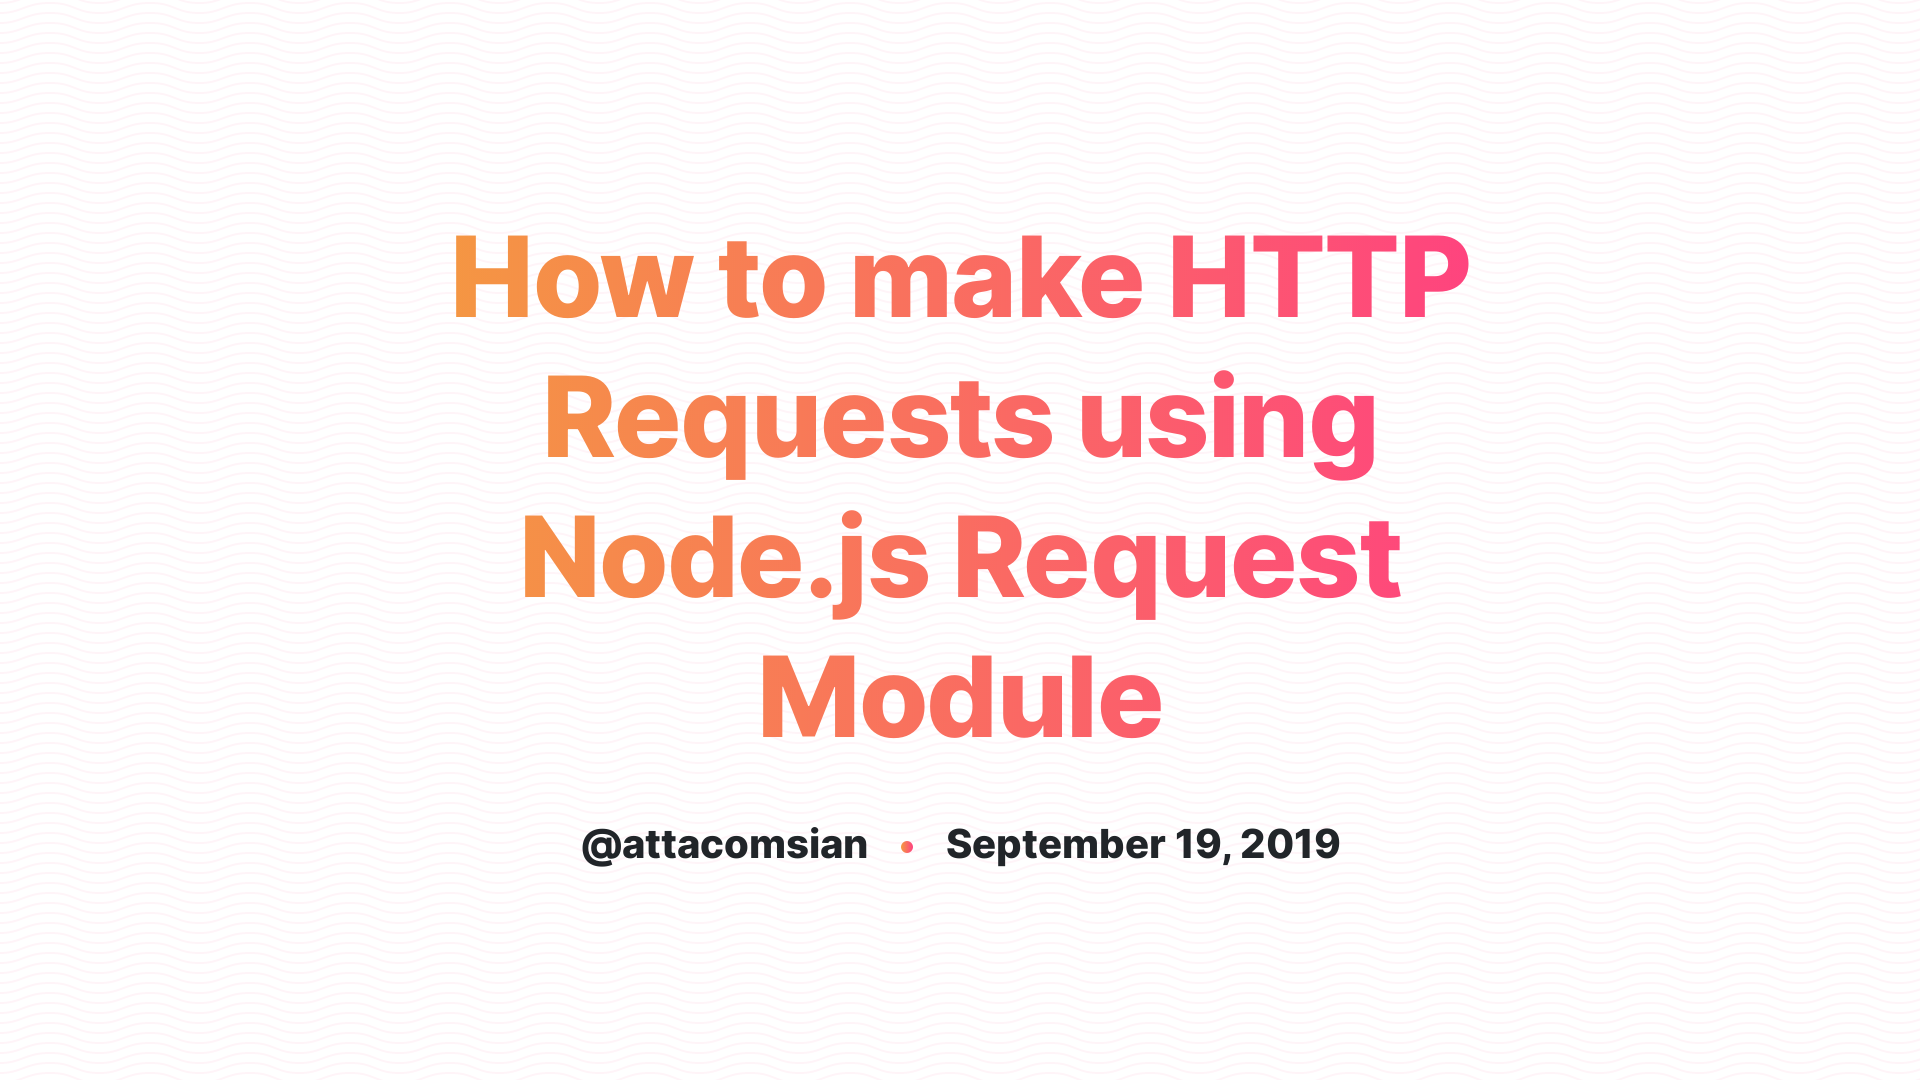 How to make HTTP Requests using Node.js Request Module